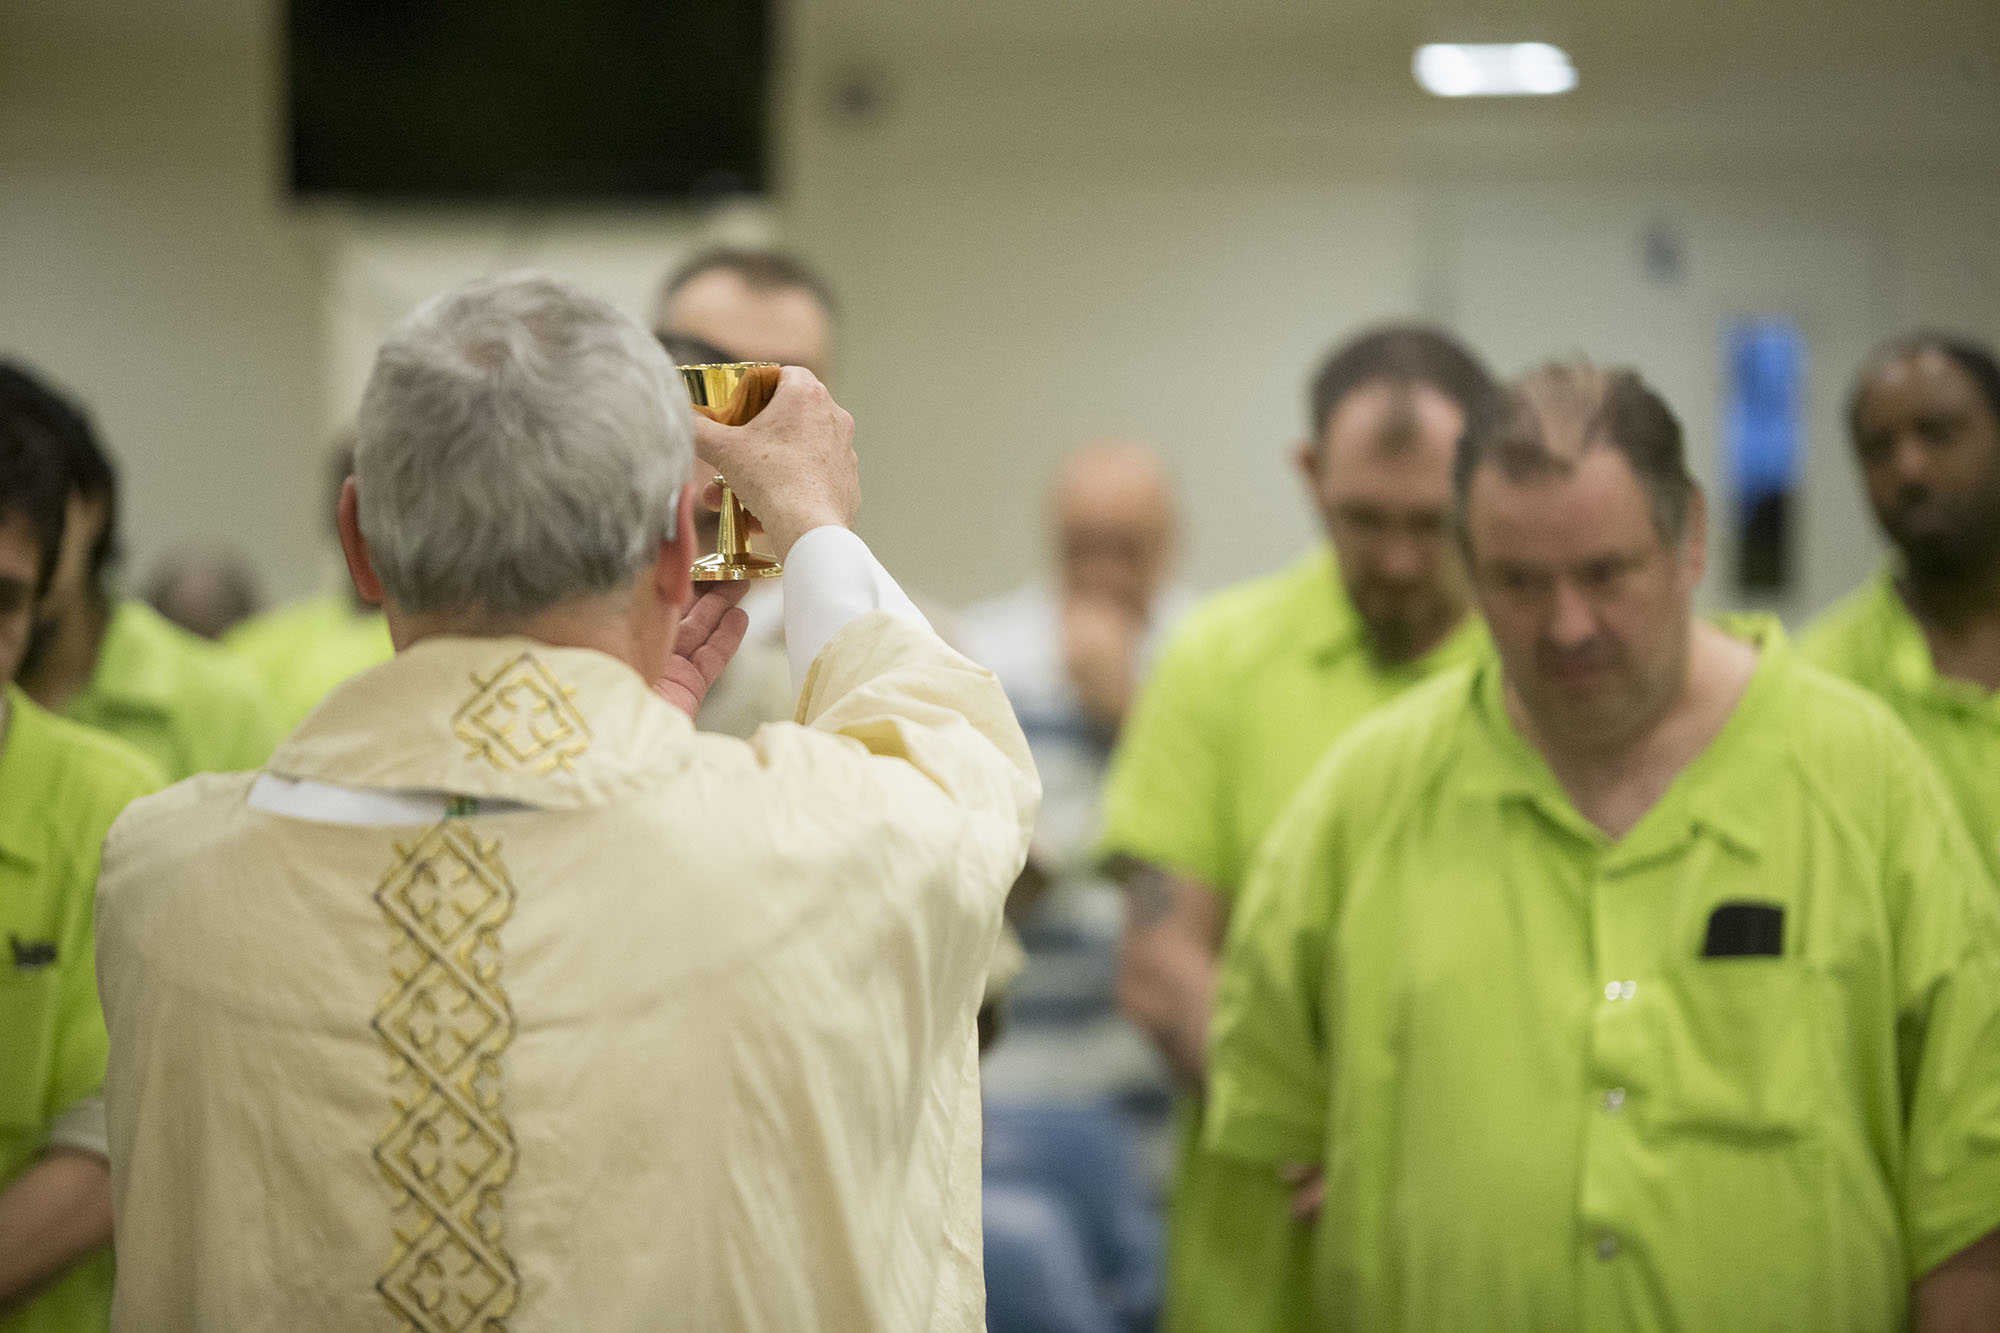 Bishop David J. Malloy holds up a chalice Sunday, March 27, 2016, during Easter Mass at the Winnebago County Jail in Rockford. MAX GERSH/STAFF PHOTOGRAPHER/RRSTAR.COM ©2016